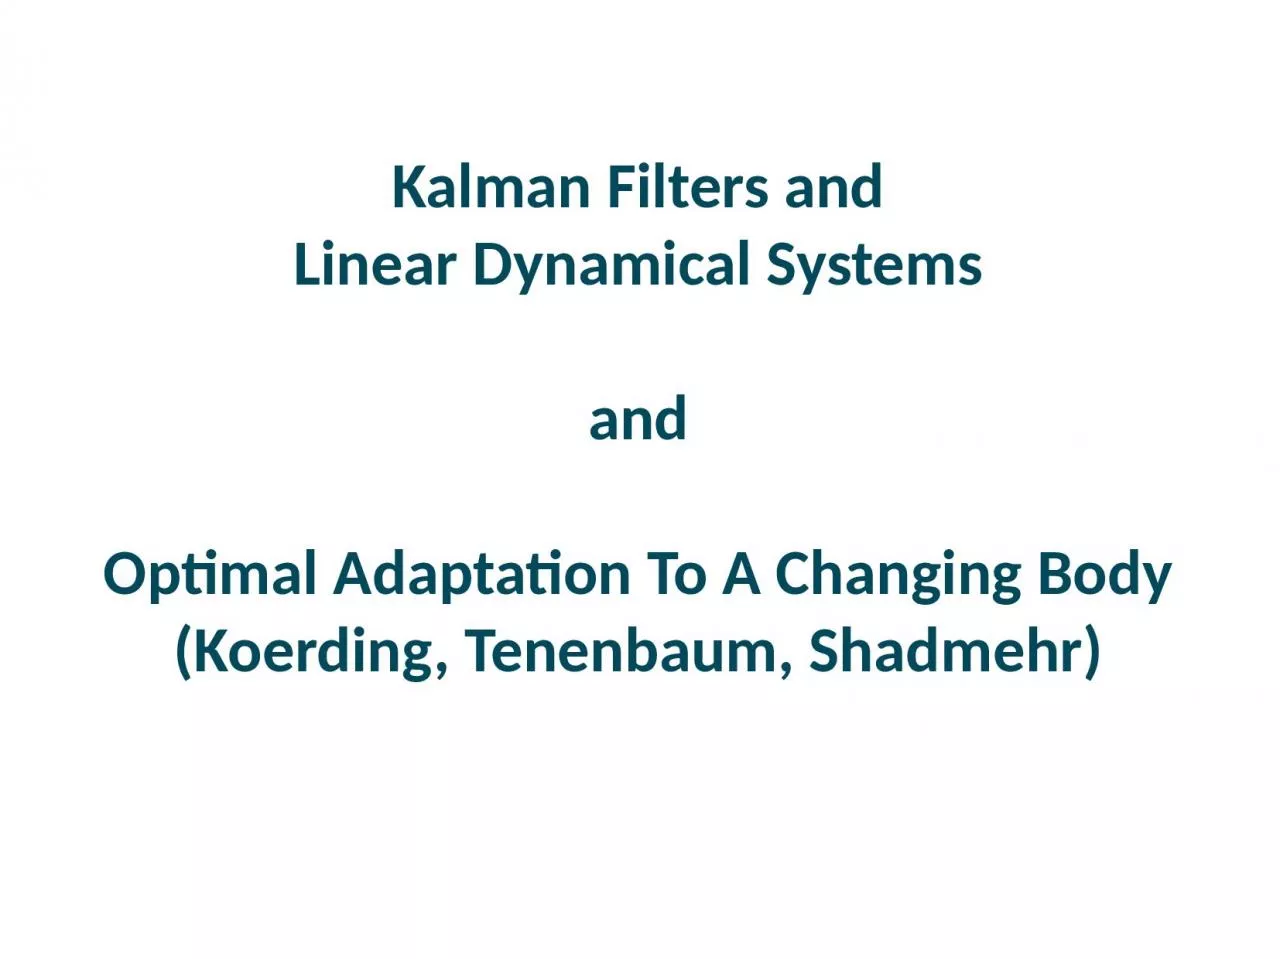 Kalman Filters and Linear Dynamical Systems